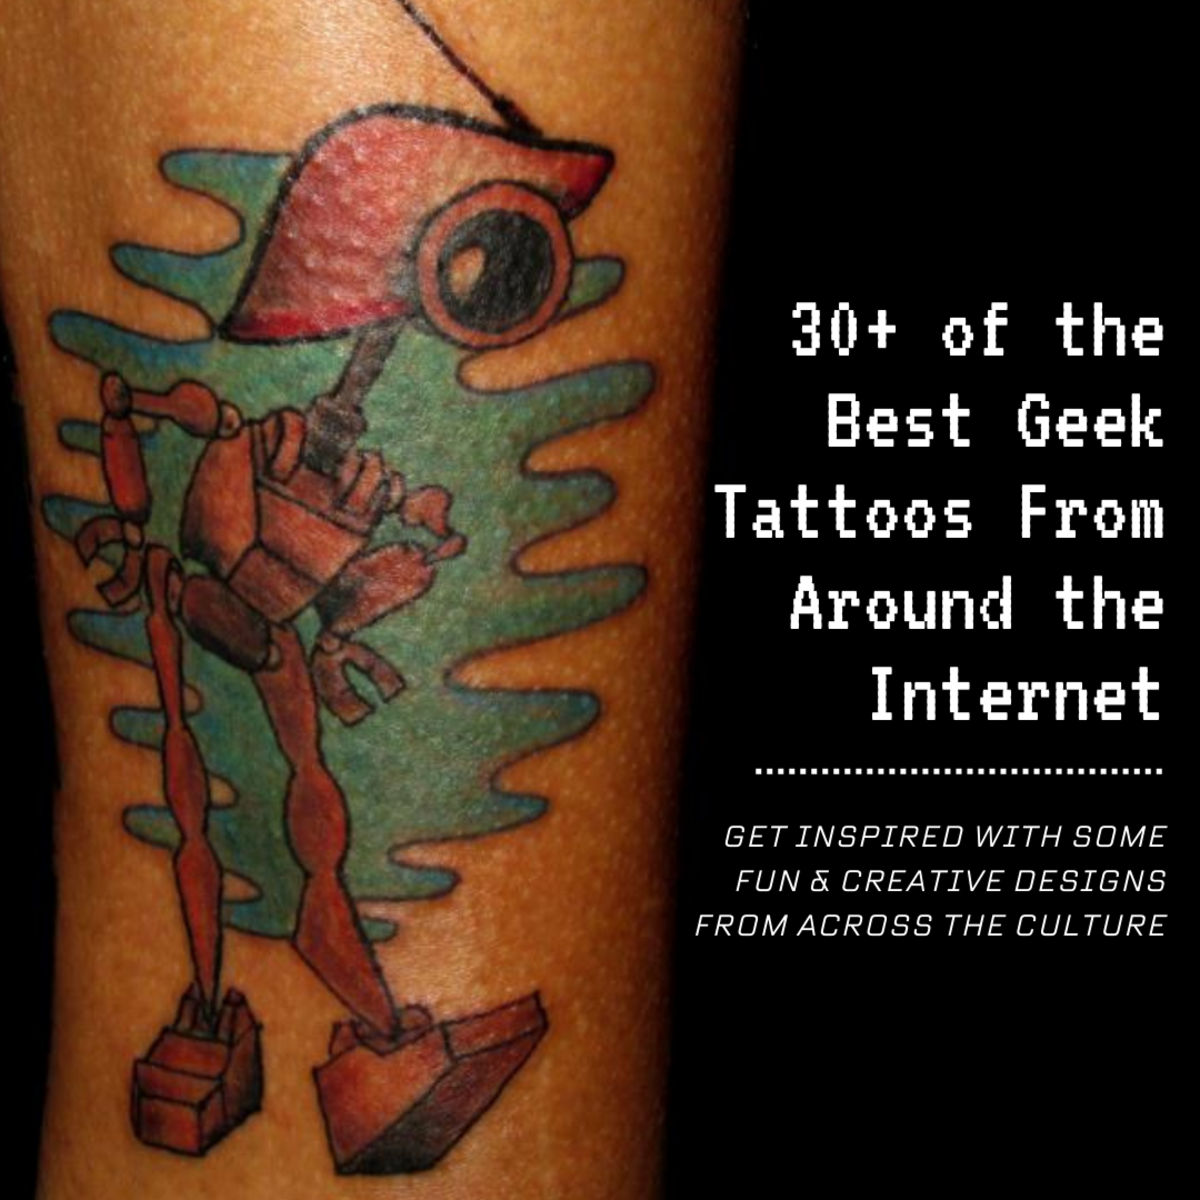 This article will showcase more than 30 of the best geek tattoos from around the internet to help you get inspired for your own.